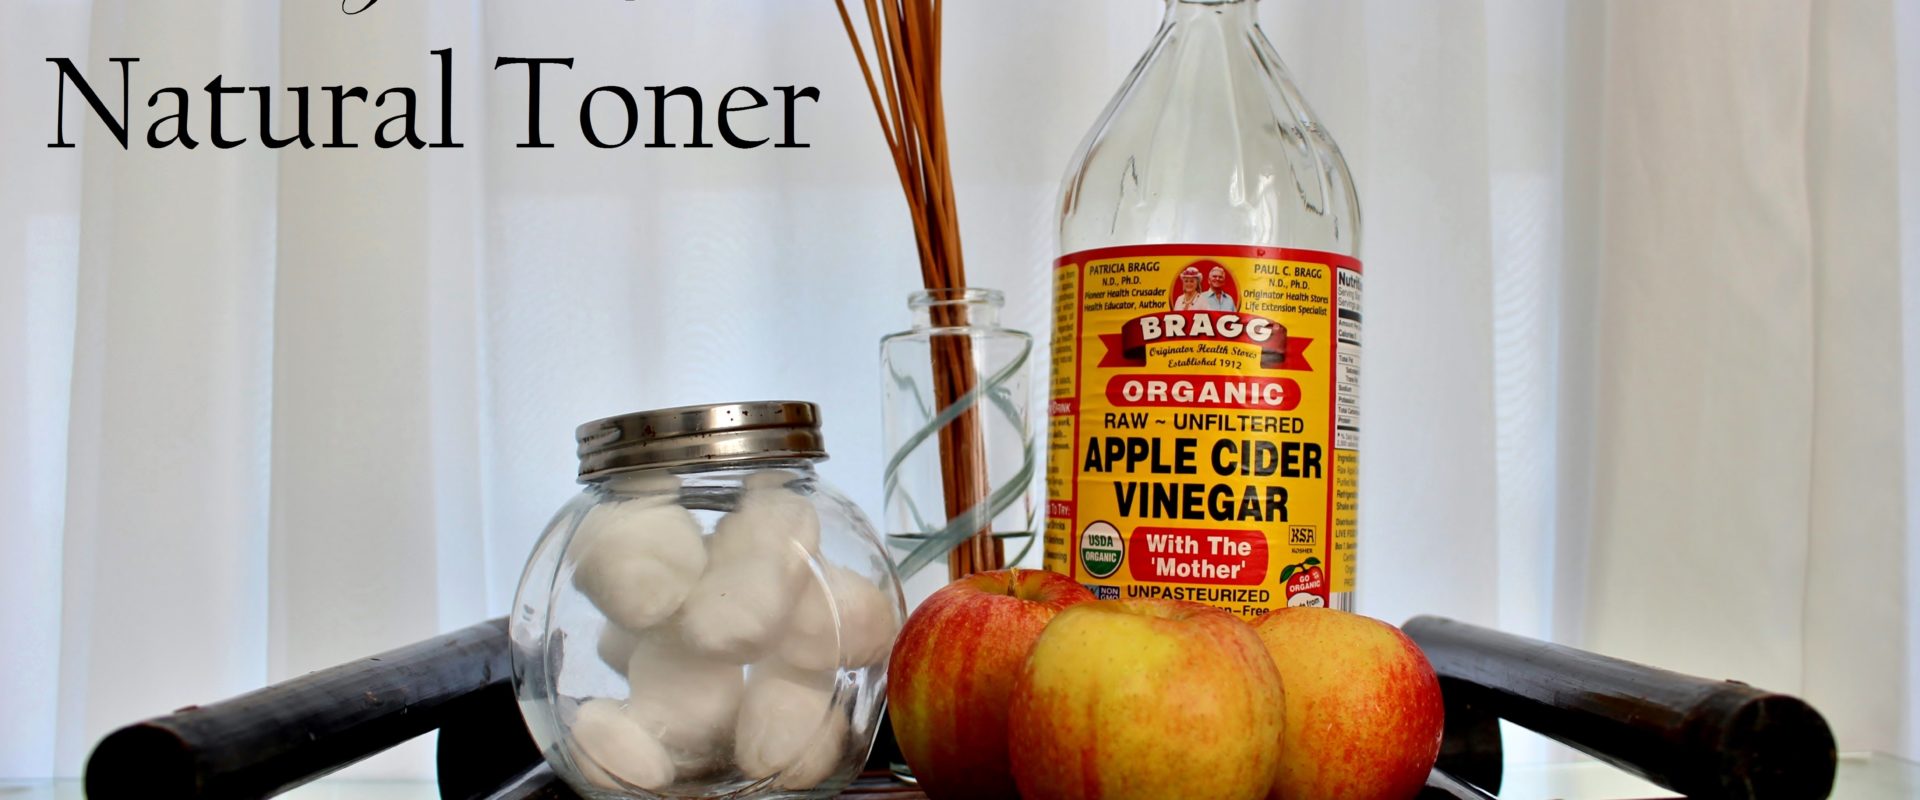 DIY Apple Cider Toner.  After you read this, you might not use anything else!